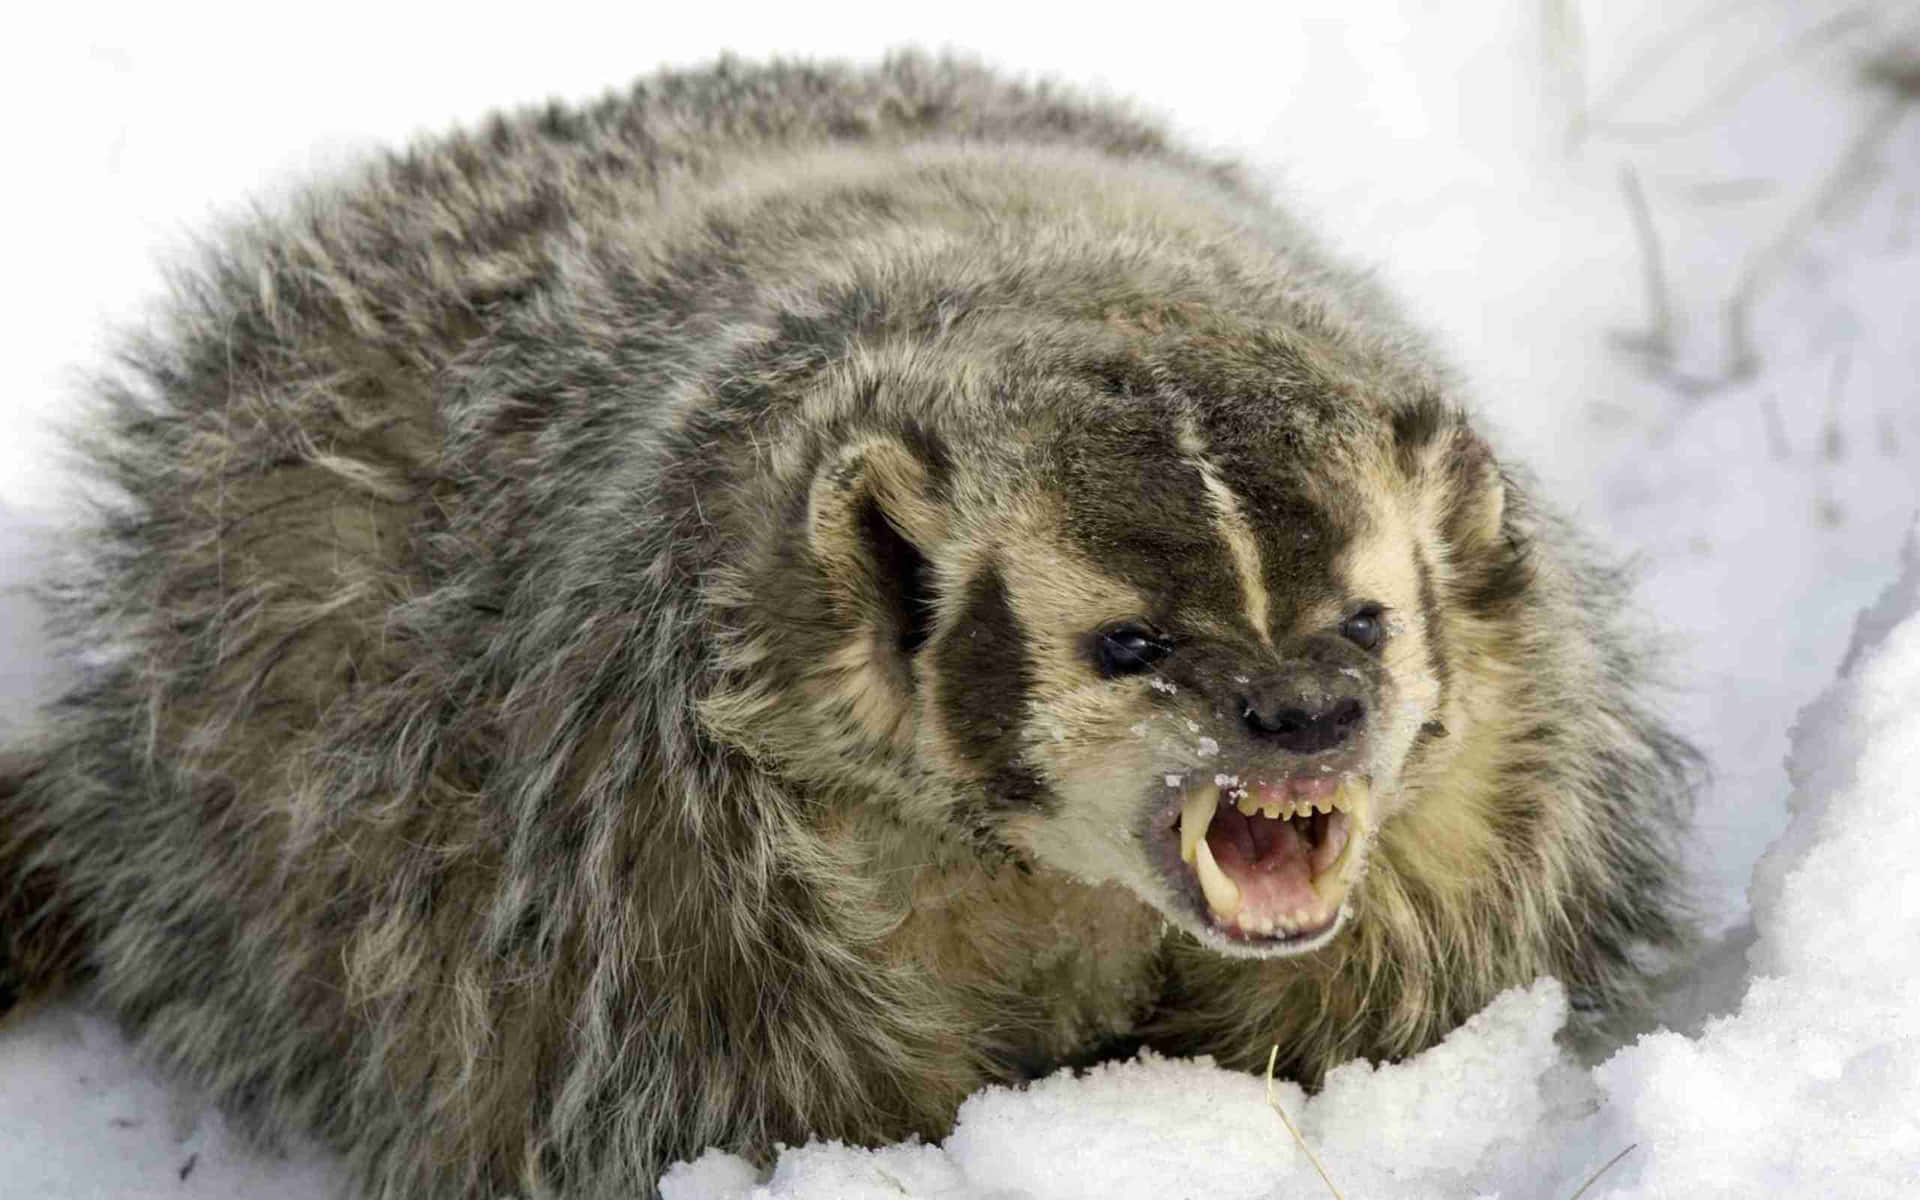 Angry Badgerin Snow.jpg Background